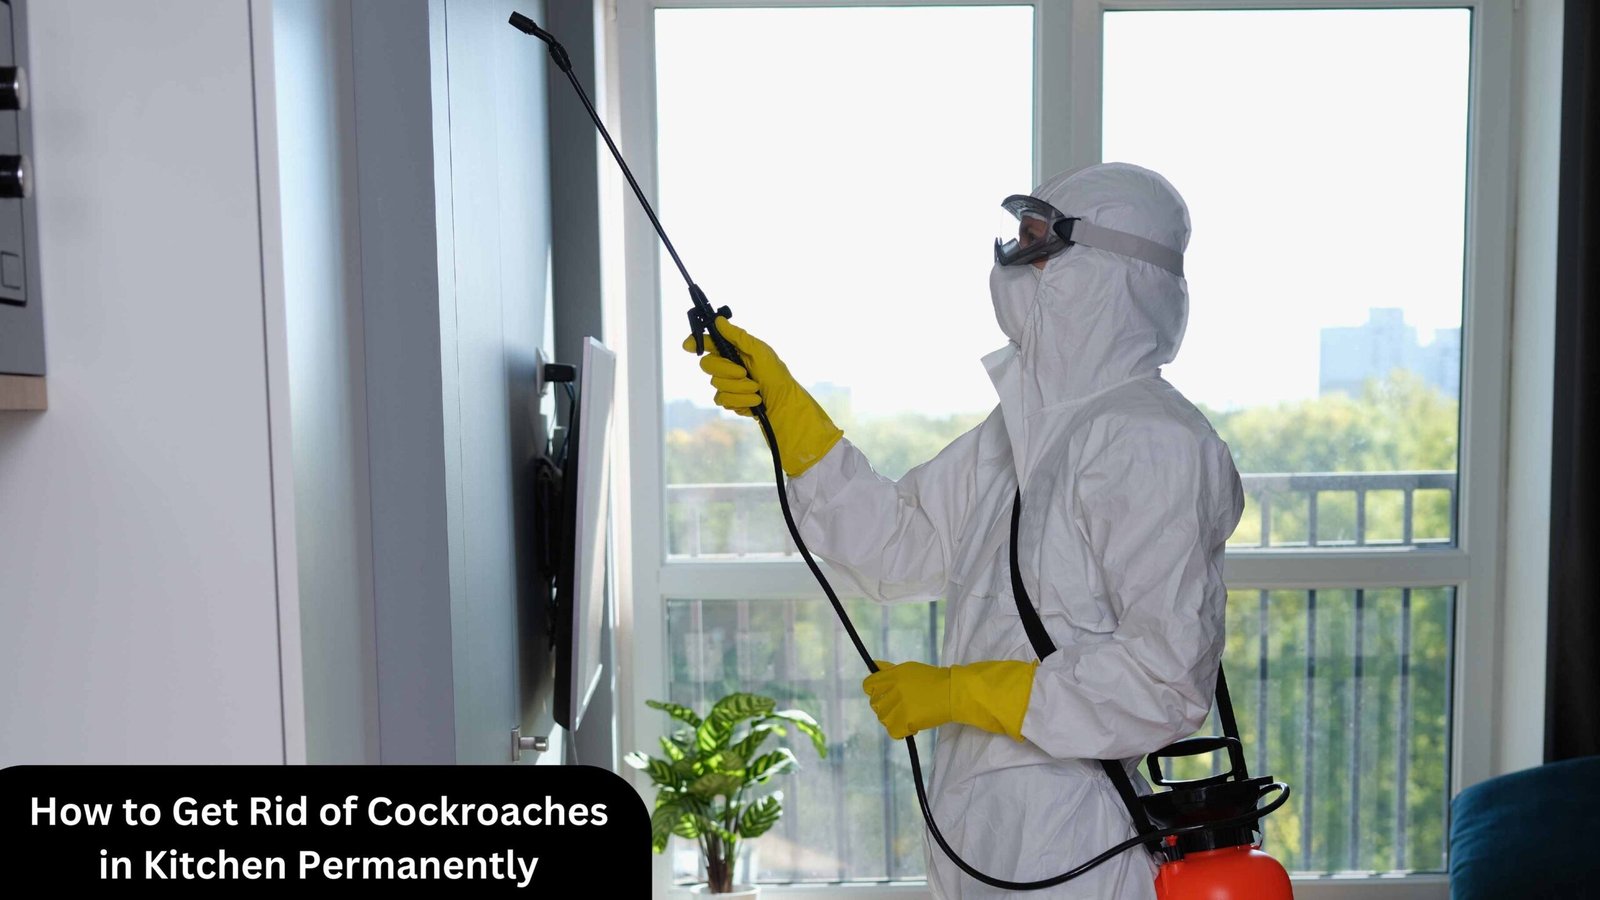 How to Get Rid of Cockroaches in Kitchen Permanently